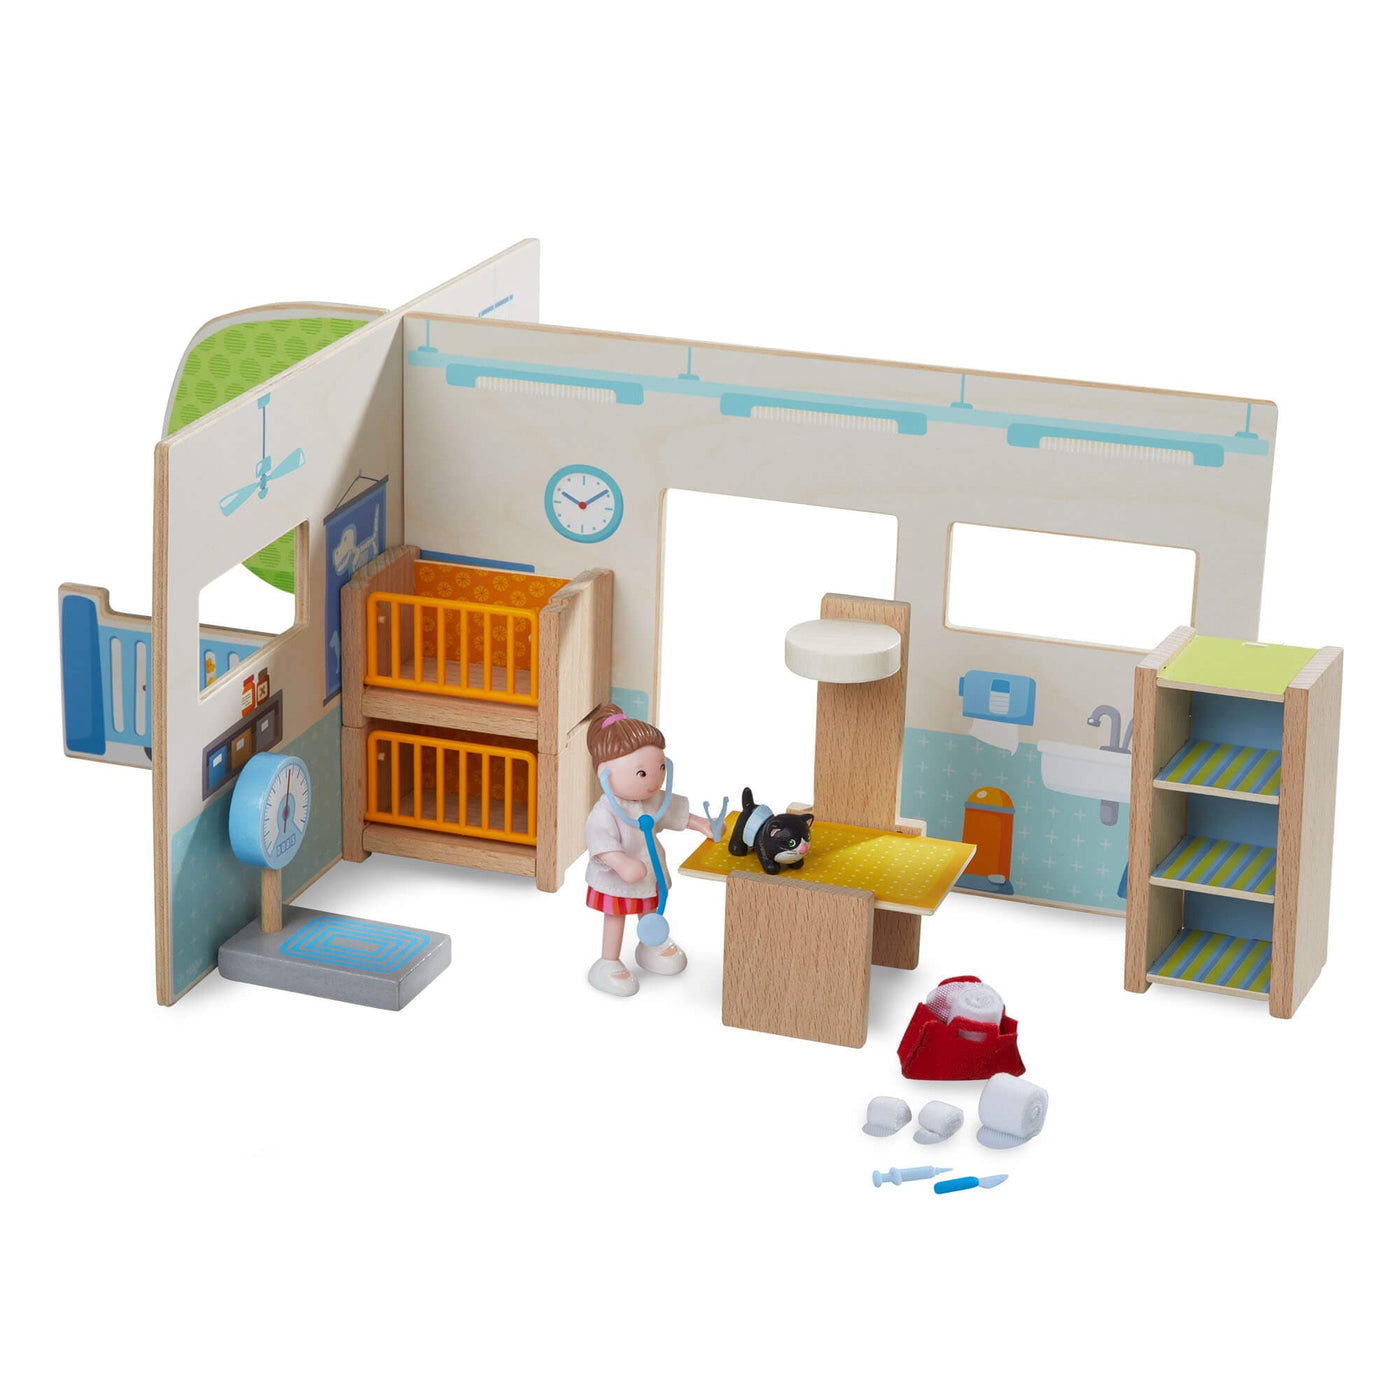 Little Friends Vet Clinic Play Set with Rebecca Doll - HABA USA